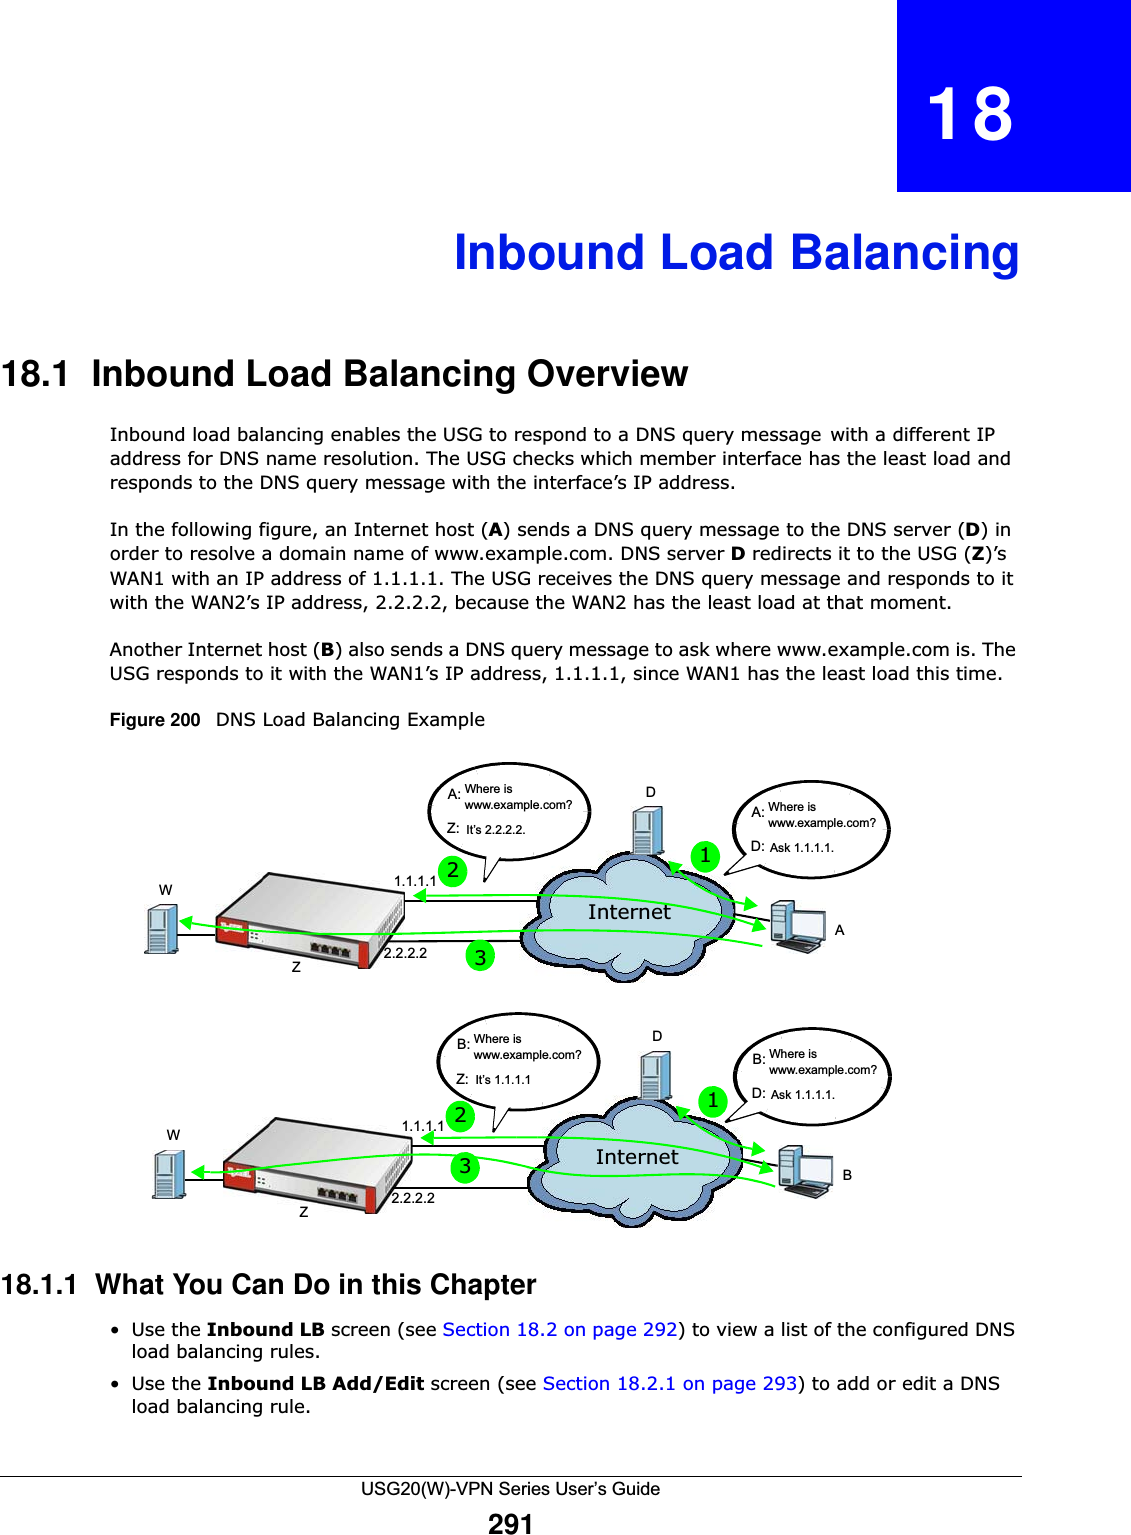 USG20(W)-VPN Series User’s Guide291CHAPTER   18Inbound Load Balancing18.1  Inbound Load Balancing OverviewInbound load balancing enables the USG to respond to a DNS query message!with a different IP address for DNS name resolution. The USG checks which member interface has the least load and responds to the DNS query message with the interface’s IP address.In the following figure, an Internet host (A) sends a DNS query message to the DNS server (D) in order to resolve a domain name of www.example.com. DNS server D redirects it to the USG (Z)’s WAN1 with an IP address of 1.1.1.1. The USG receives the DNS query message and responds to it with the WAN2’s IP address, 2.2.2.2, because the WAN2 has the least load at that moment.Another Internet host (B) also sends a DNS query message to ask where www.example.com is. The USG responds to it with the WAN1’s IP address, 1.1.1.1, since WAN1 has the least load this time.Figure 200   DNS Load Balancing Example18.1.1  What You Can Do in this Chapter•Use the Inbound LB screen (see Section 18.2 on page 292) to view a list of the configured DNS load balancing rules.•Use the Inbound LB Add/Edit screen (see Section 18.2.1 on page 293) to add or edit a DNS load balancing rule.InternetWhere is www.example.com?Ask 1.1.1.1.A:D:AD1.1.1.12.2.2.2WZWhere is www.example.com?It’s 2.2.2.2.A:Z:123InternetBD1.1.1.12.2.2.2WZ123Where is www.example.com?Ask 1.1.1.1.B:D:Where is www.example.com?It’s 1.1.1.1B:Z: